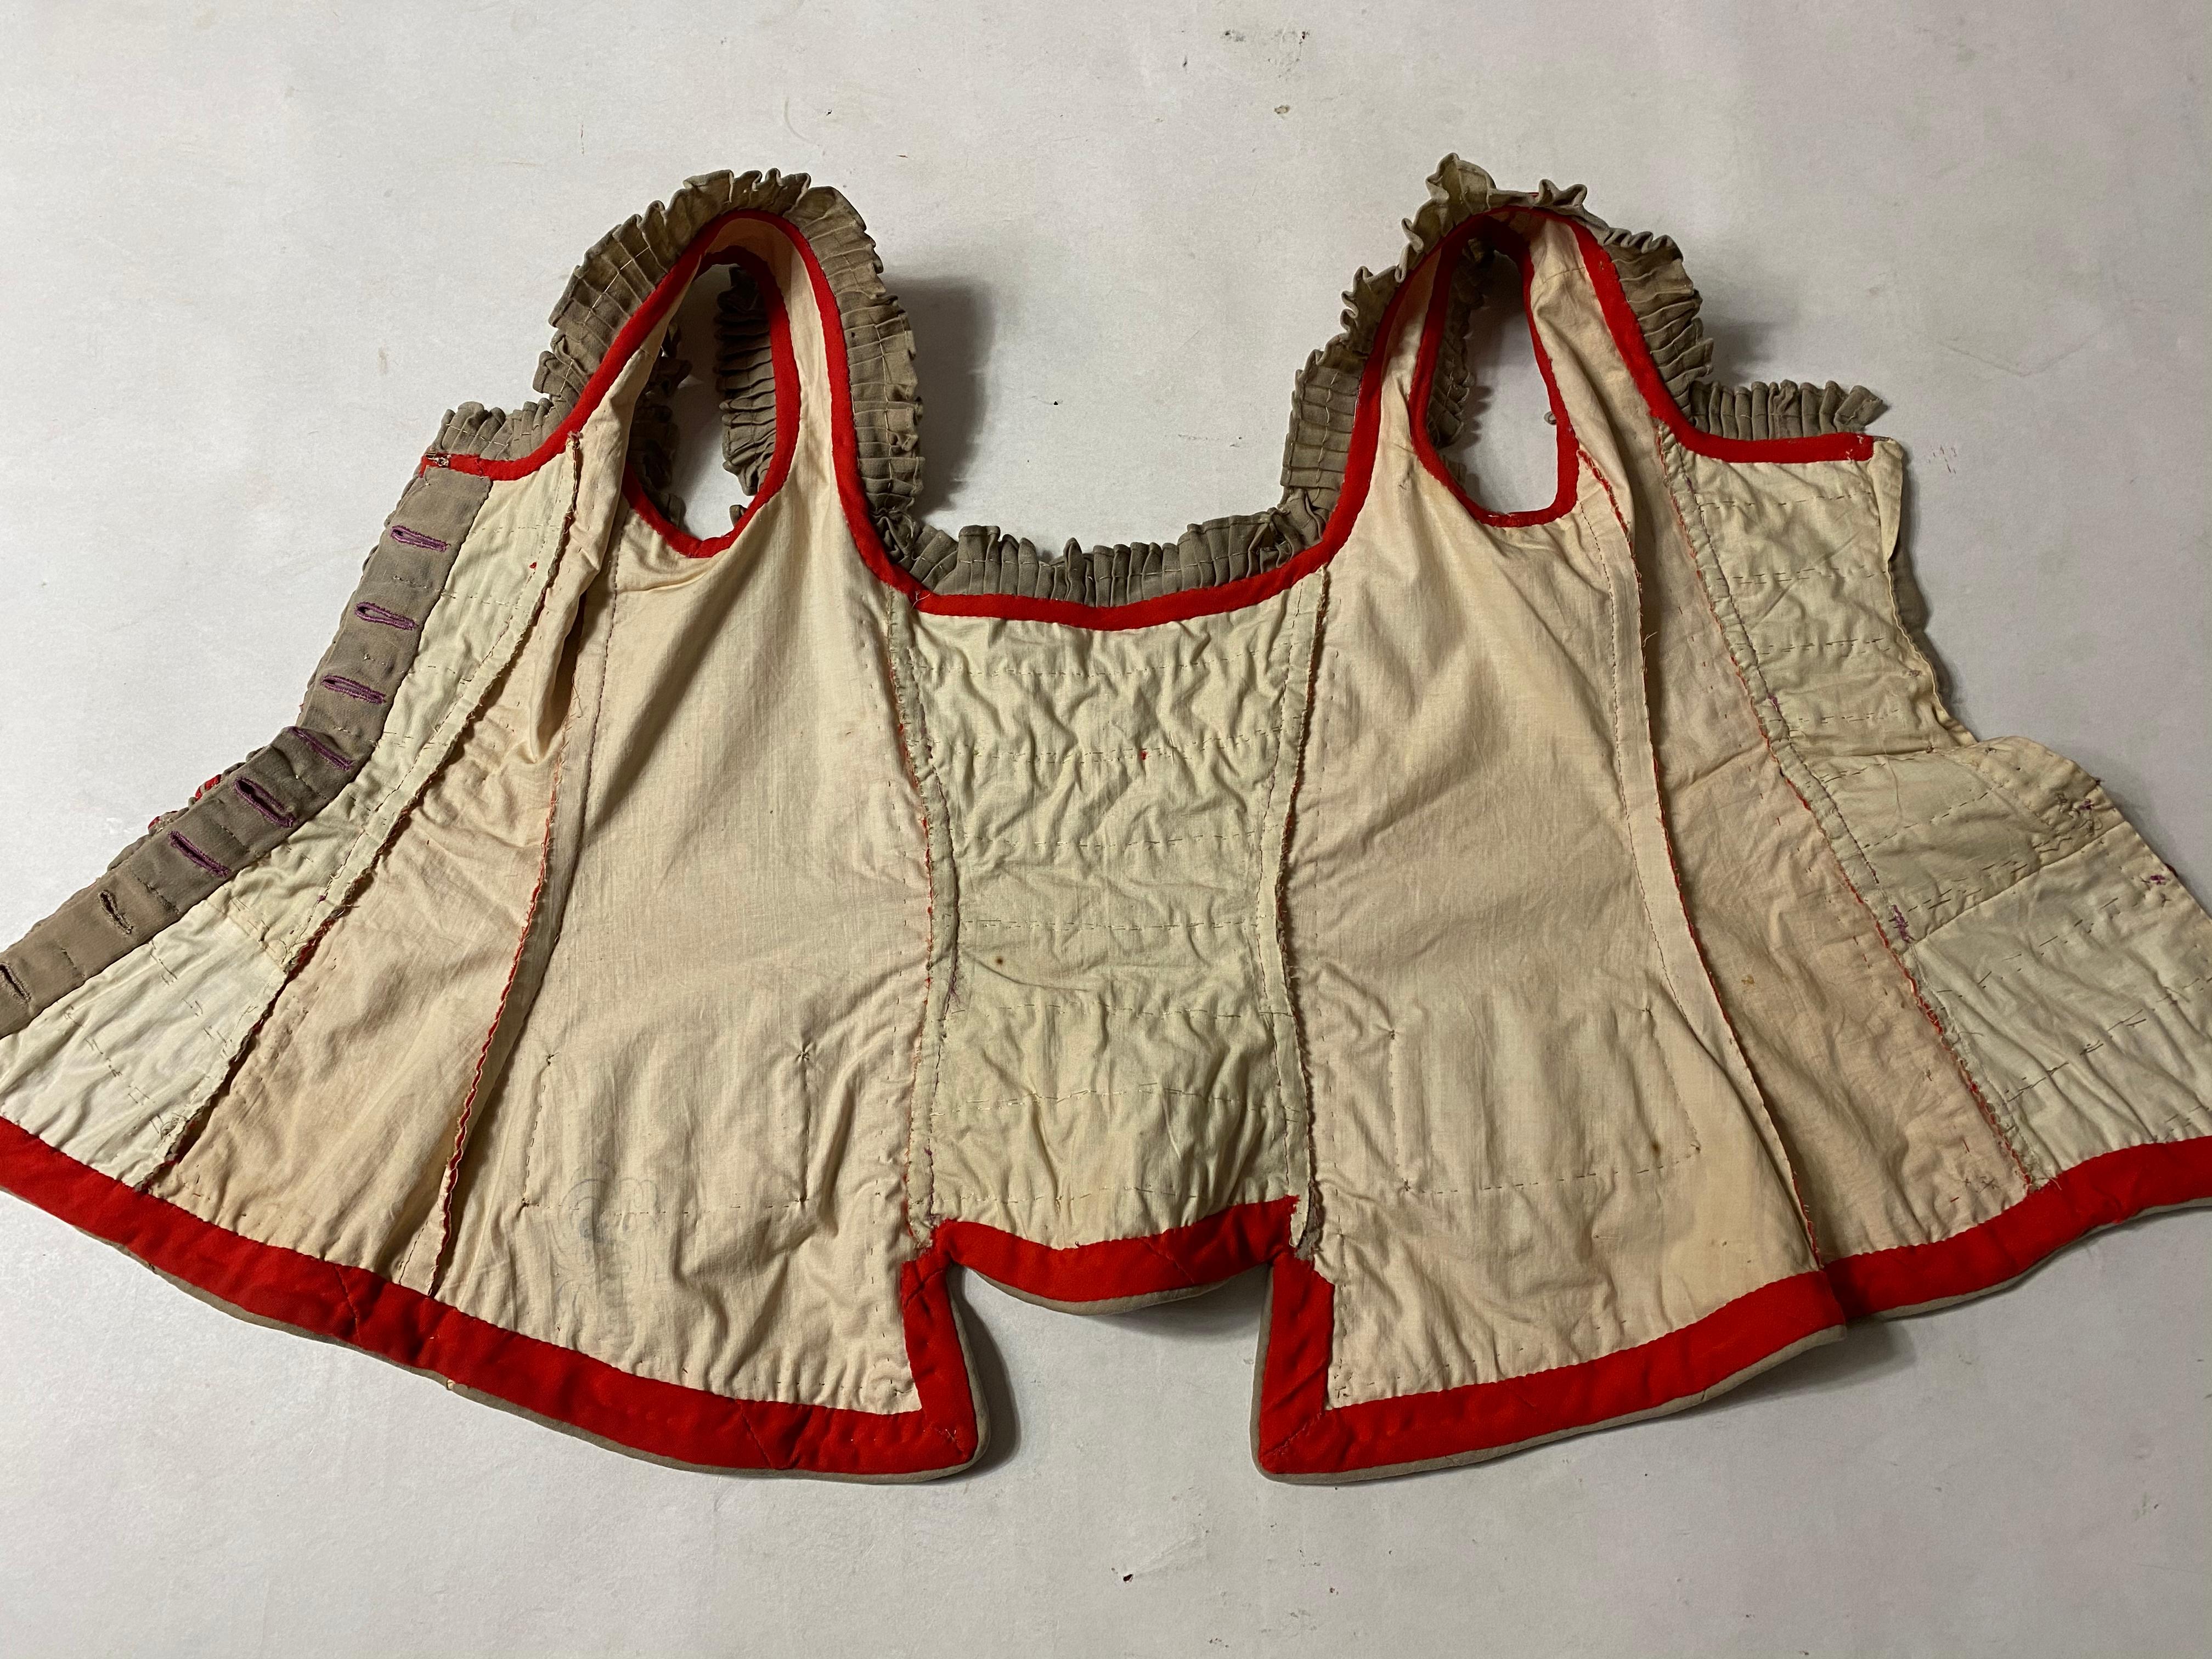 An Historical Circus, Fancy or Memorial Dress in Scarlet Challis USA Circa 1890 For Sale 10